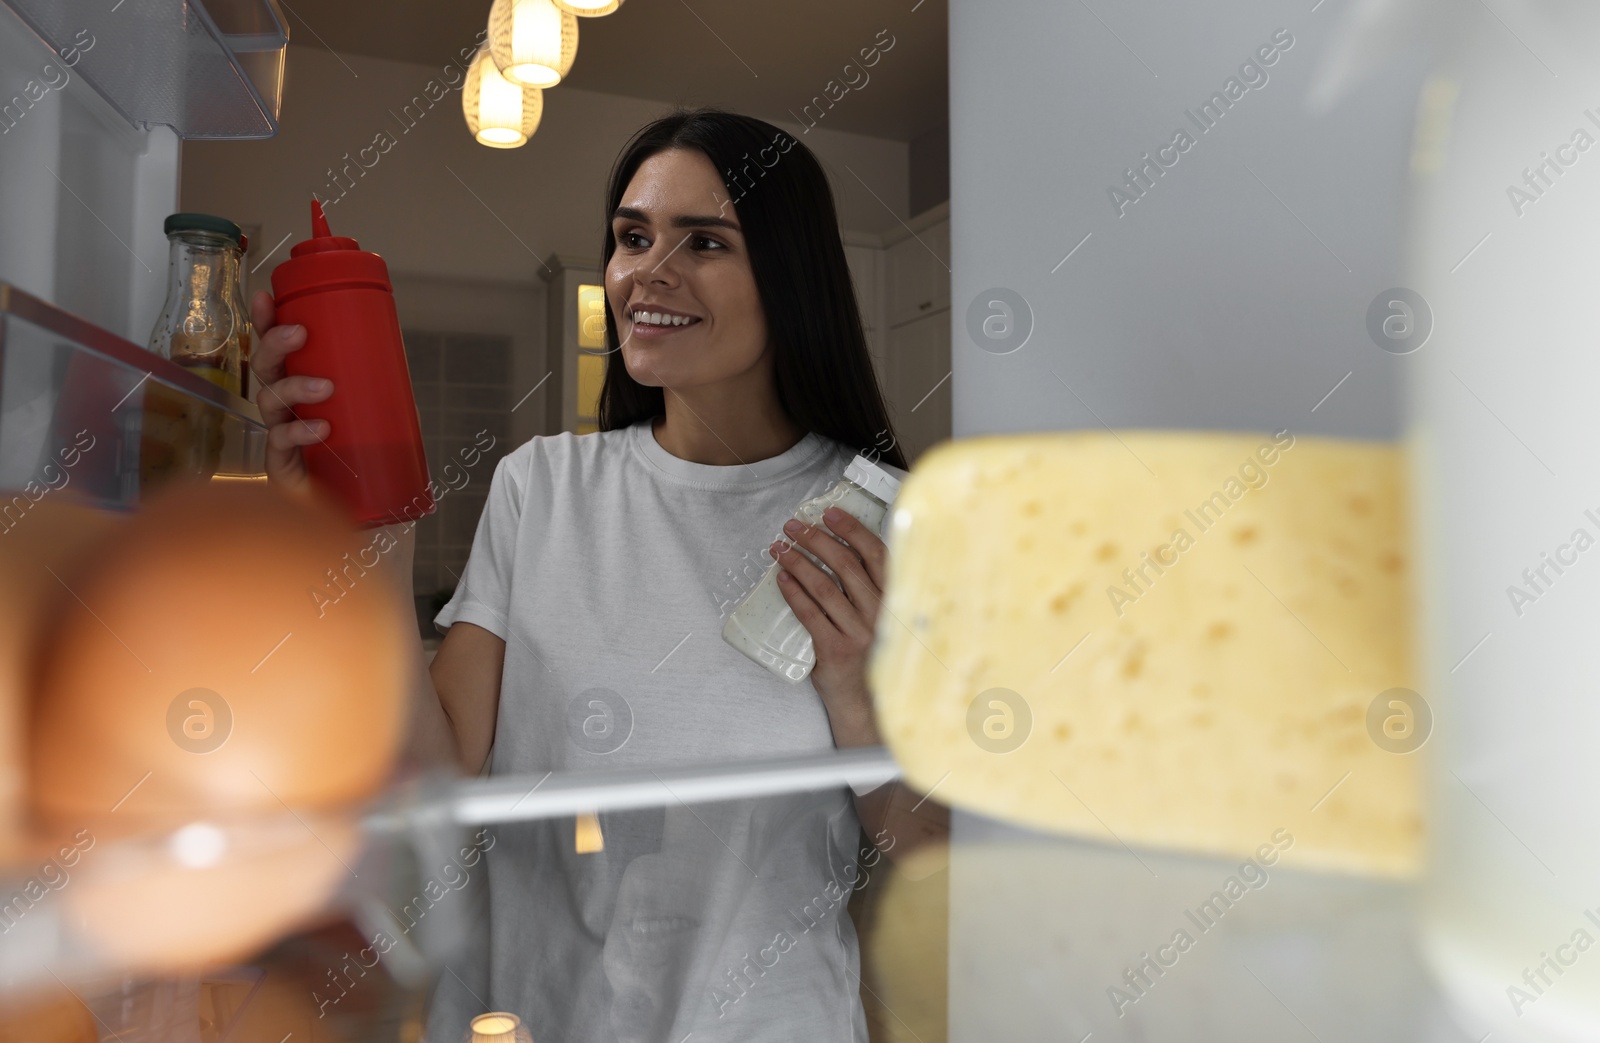 Photo of Young woman taking ketchup and mayonnaise out of refrigerator in kitchen at night, view from inside